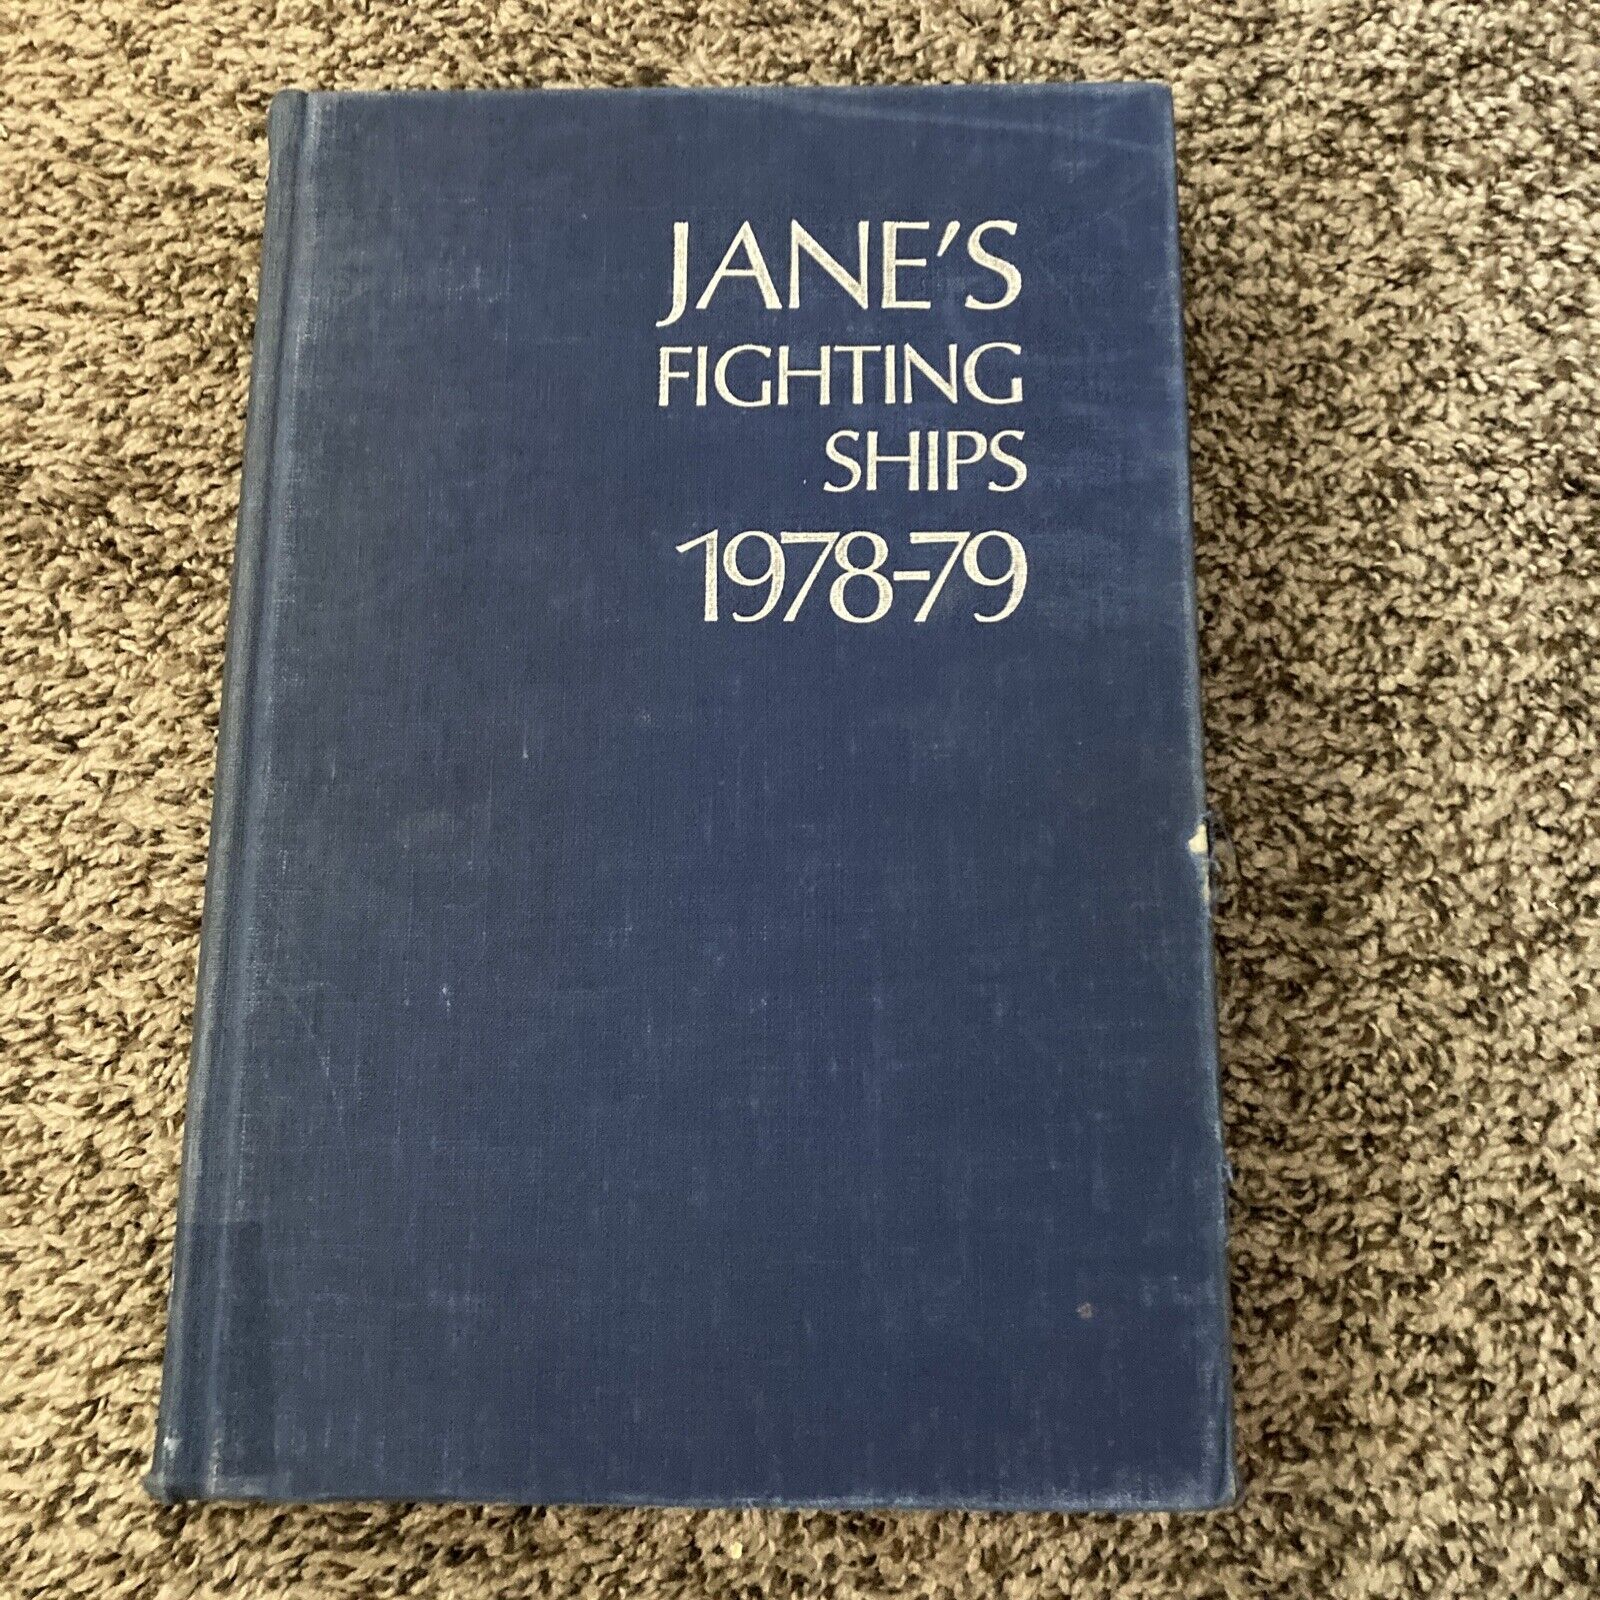 Jane\'s Fighting Ships Naval Reference Book Military 1978-79